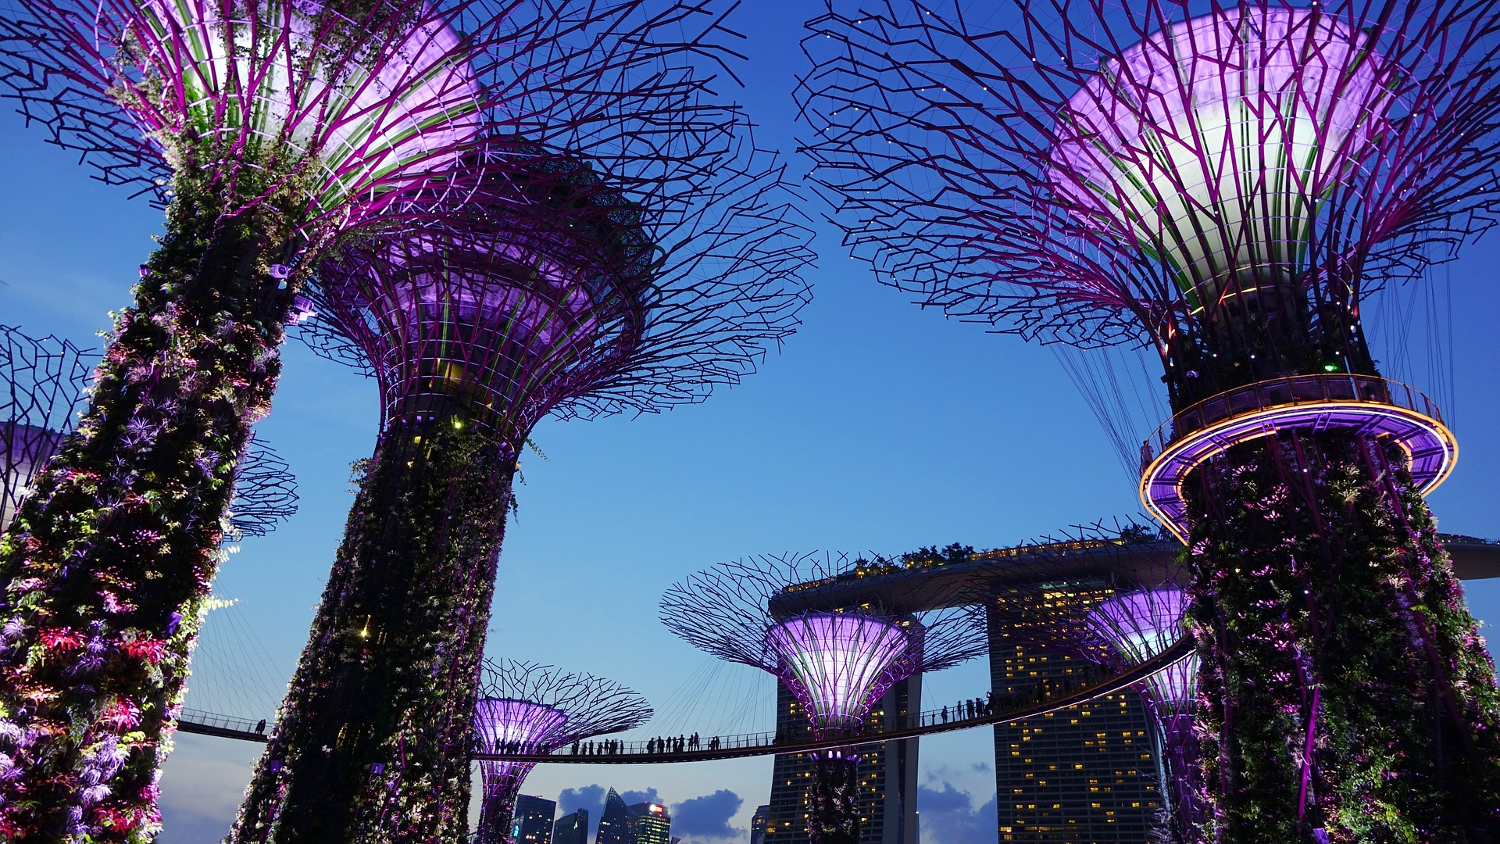 Gardens by the Bay, #Singapore - best places to visit in Singapore #travel